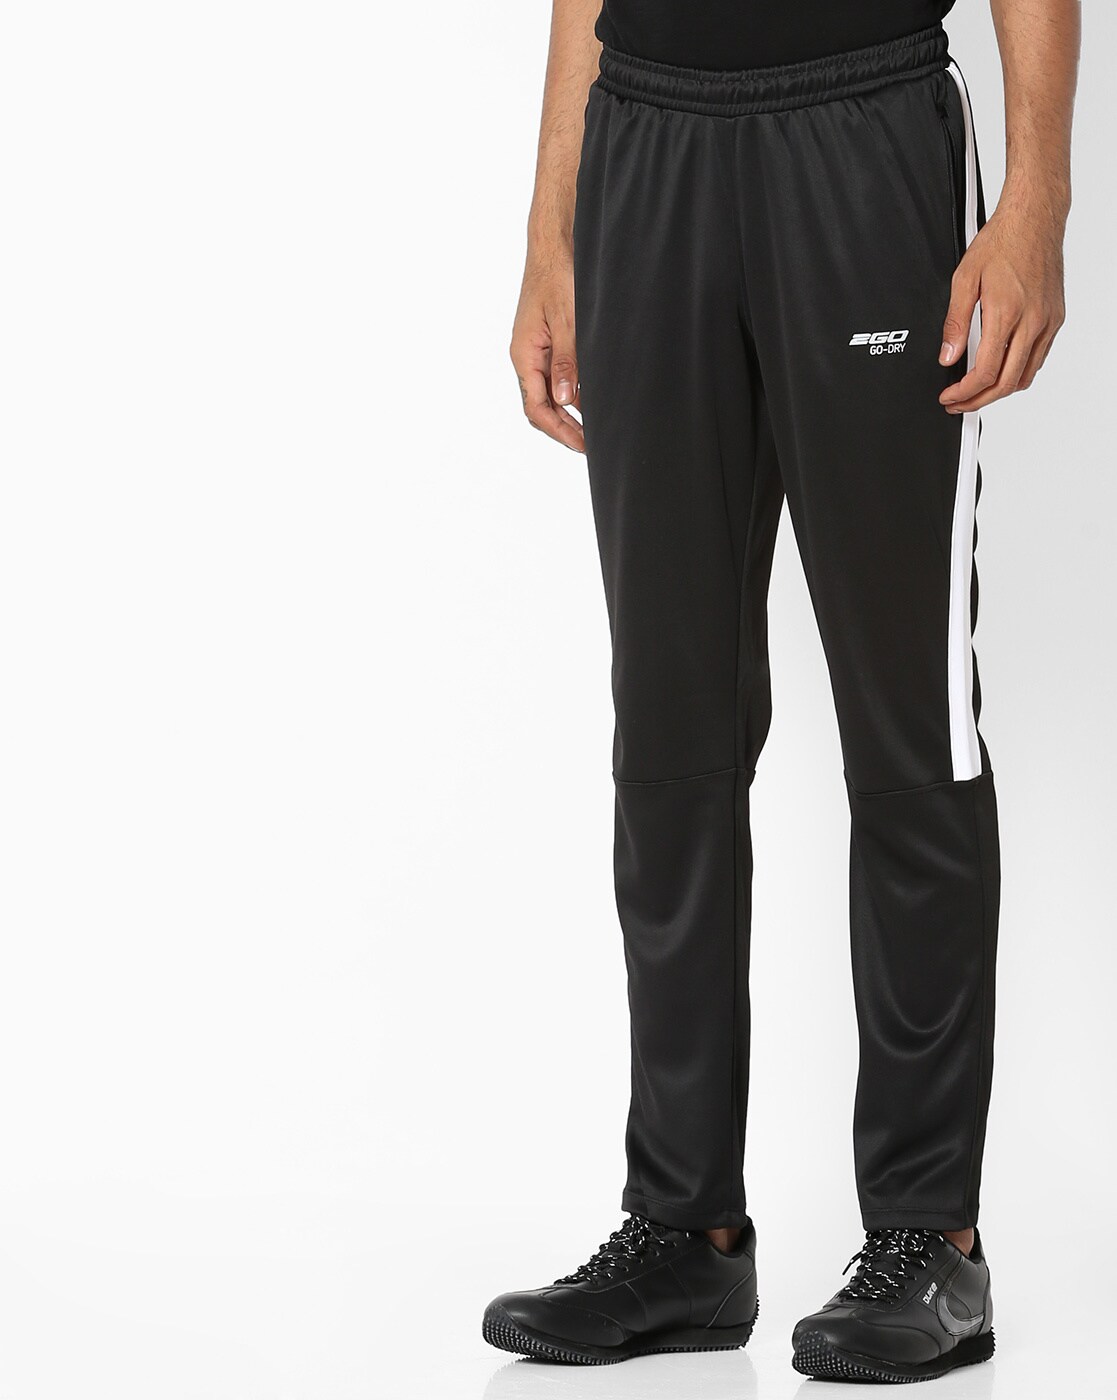 Men Sports Trouser in Rohtak - Dealers, Manufacturers & Suppliers -Justdial